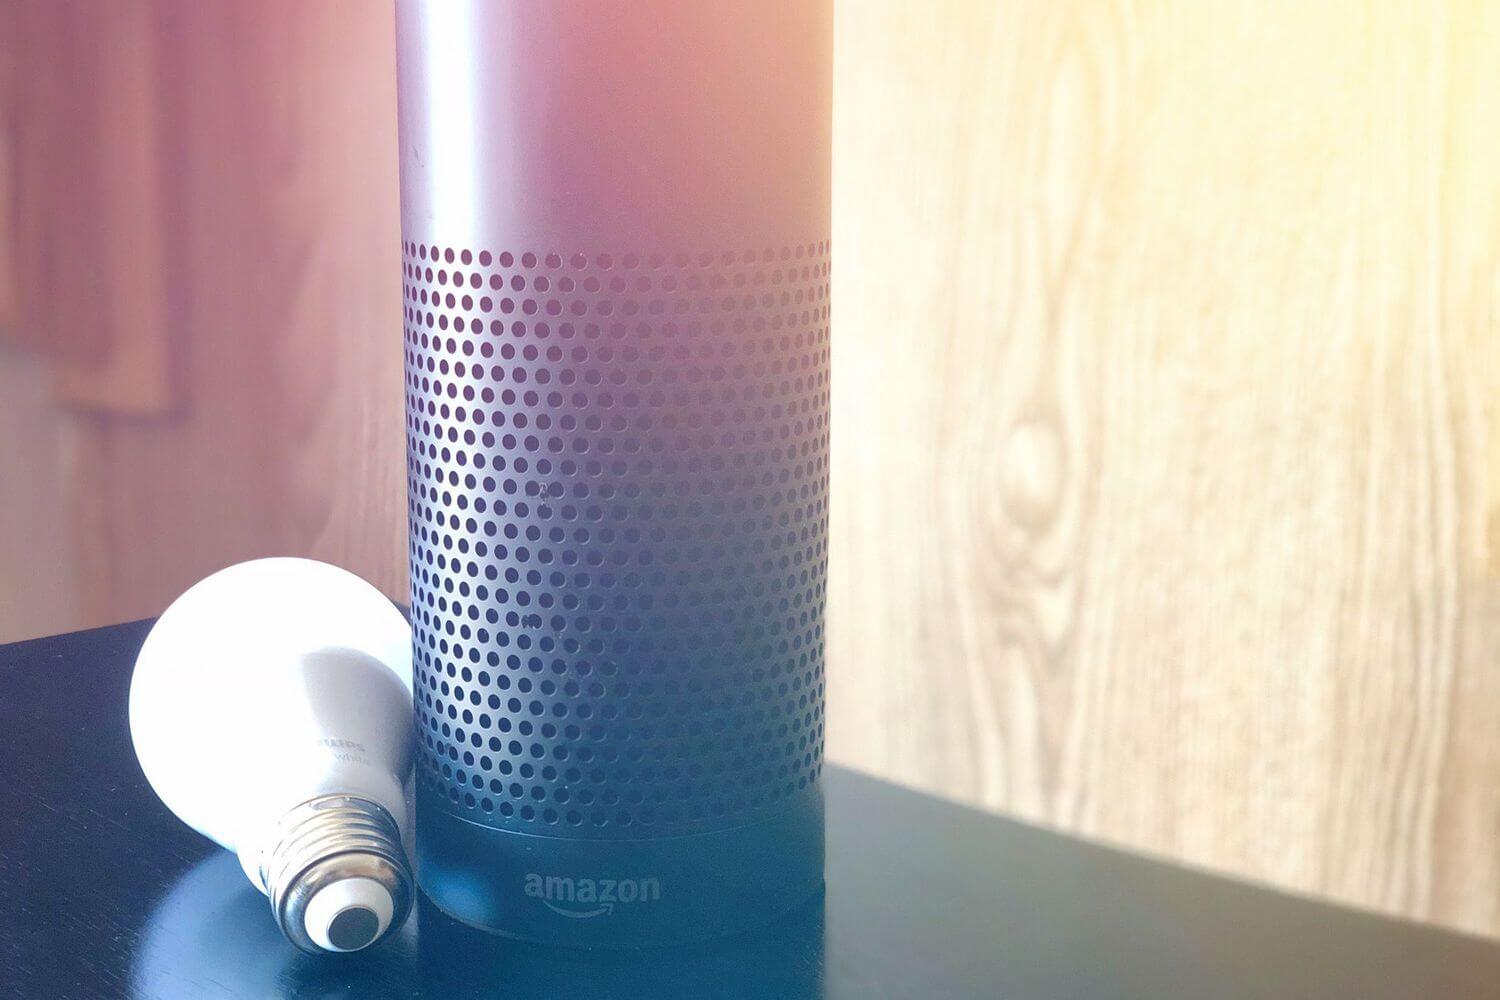 Connect Philips Hue to Alexa